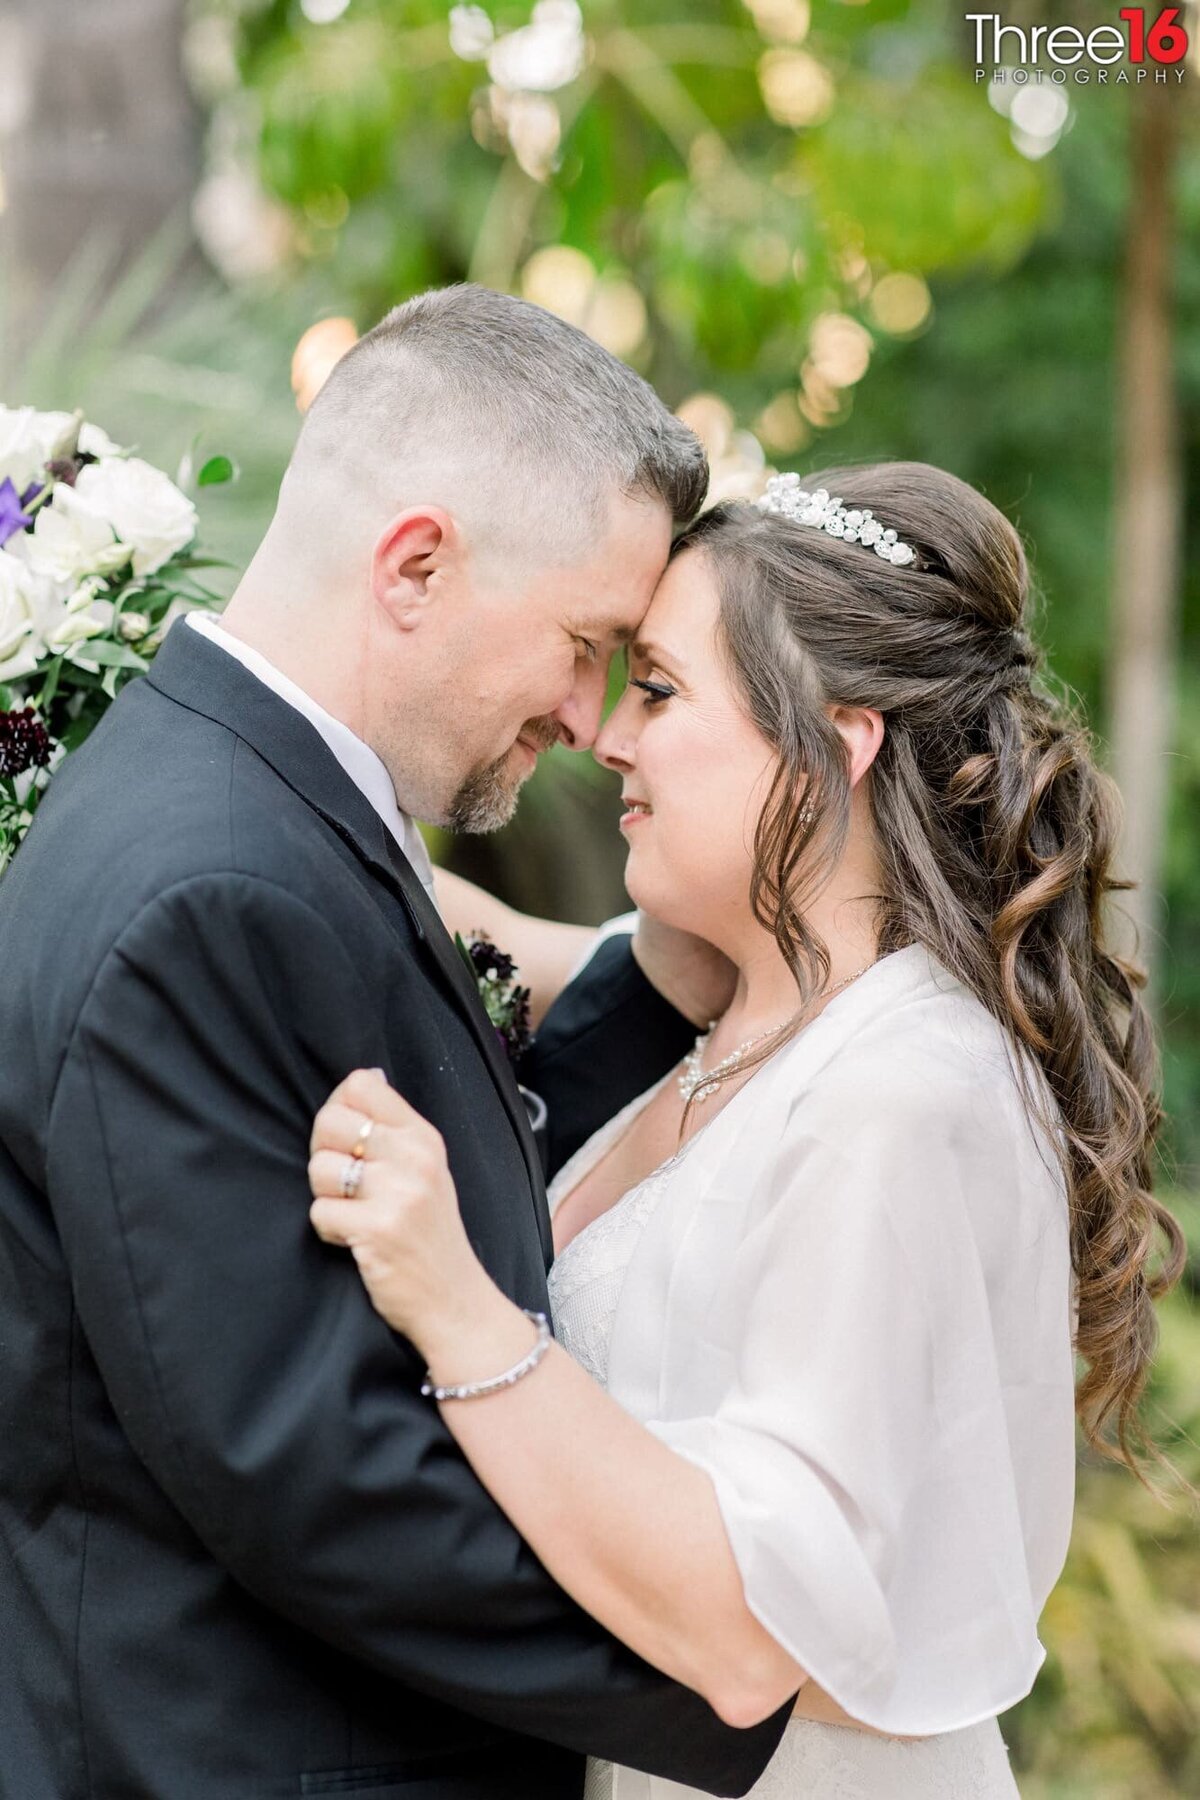 Sweet tender moment between newly married husband and wife